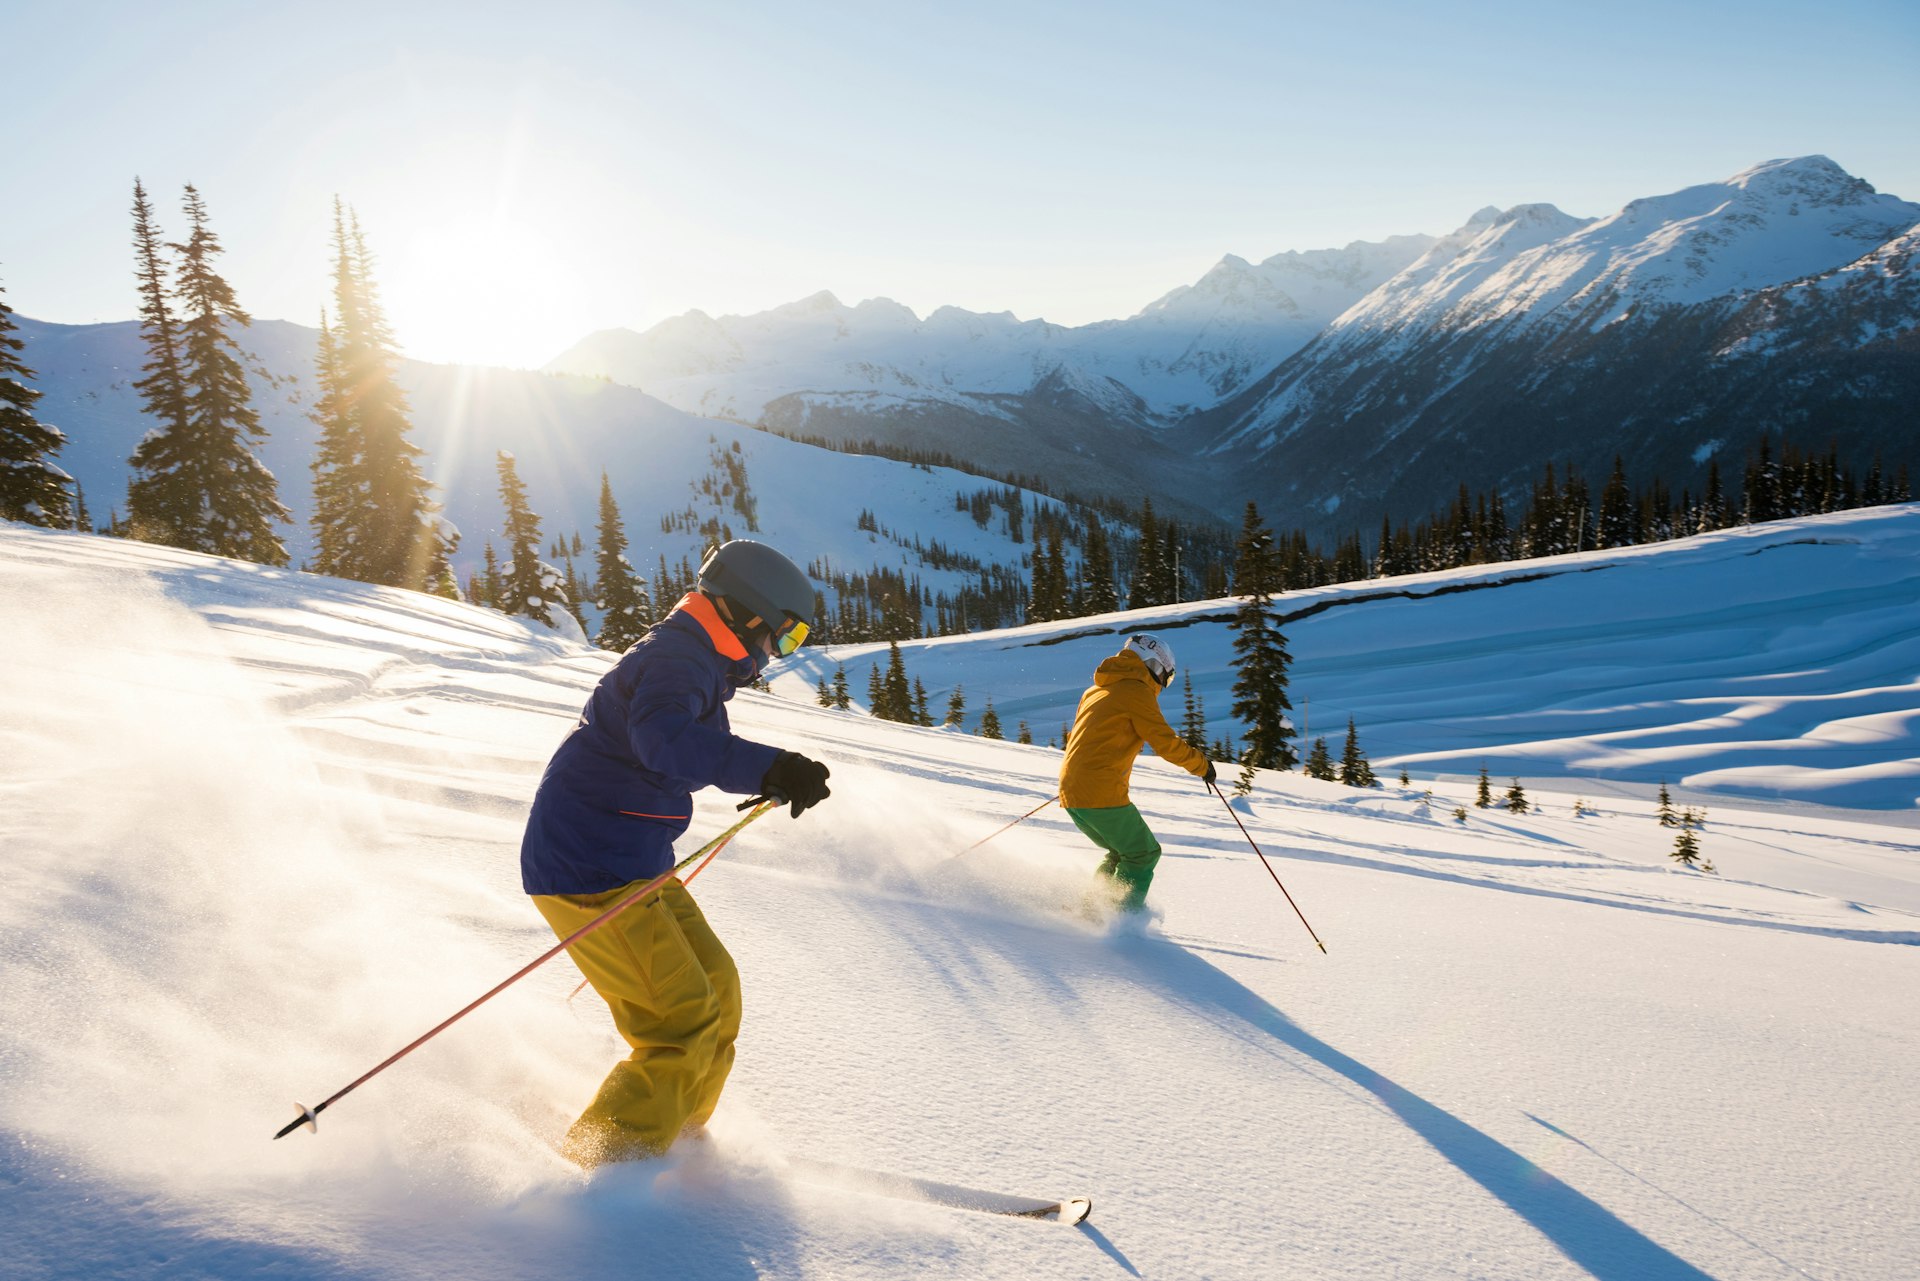 Skiers descend a powdery slope in a mountainous landscape bathed in bright sunshine